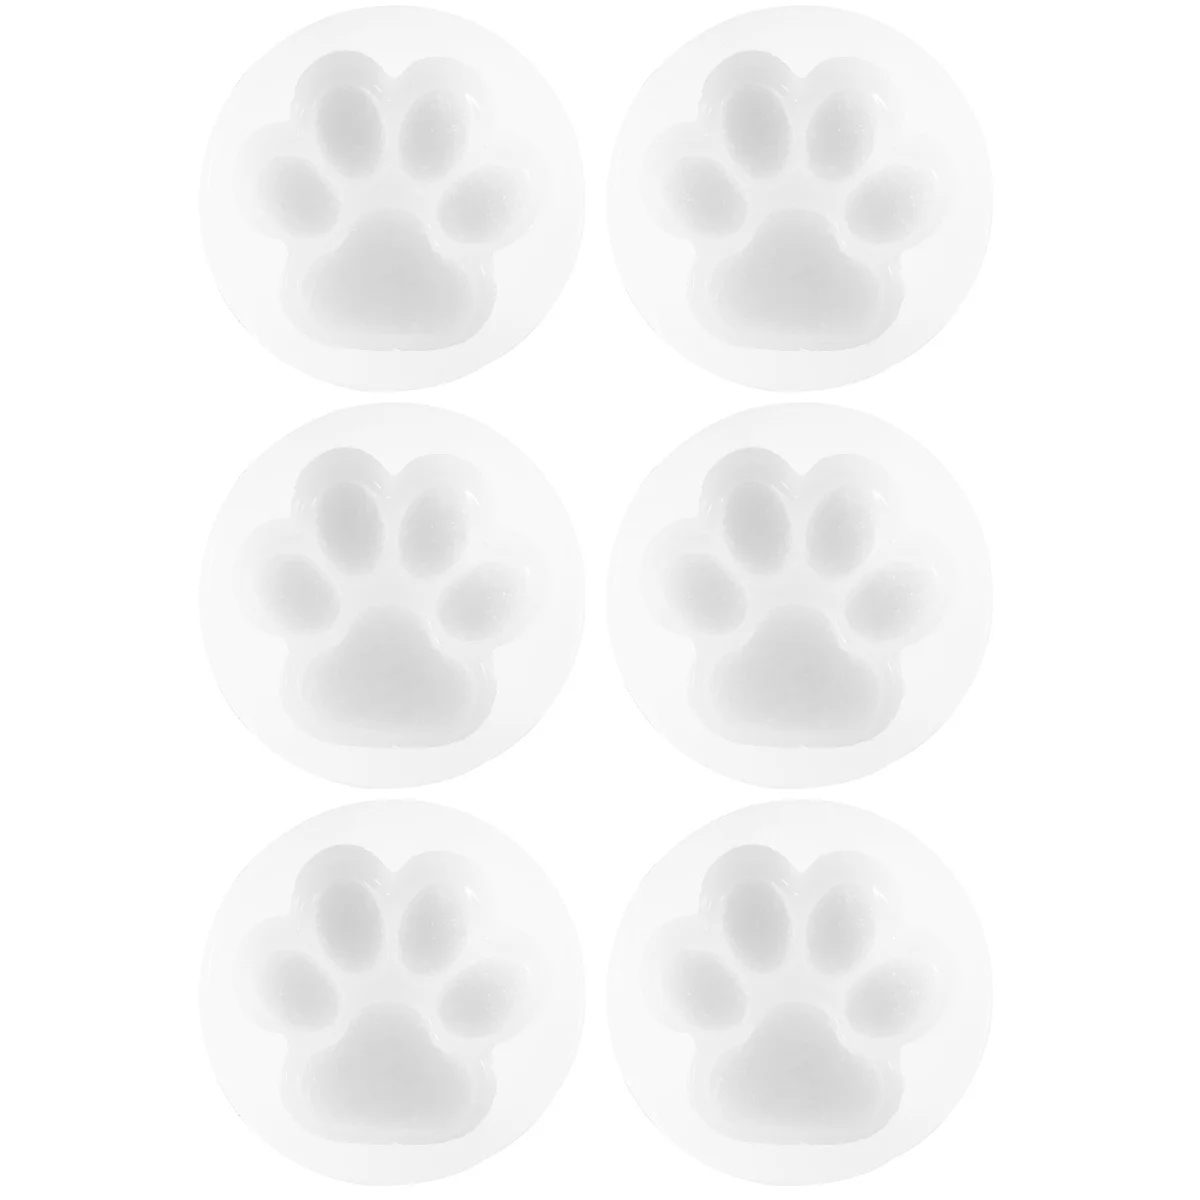 

6 Pcs Silicone Popsicle Molds Cat Claw Epoxy Pendant Casting Ornament Resin Puppy 8X4.5CM White Silica Gel